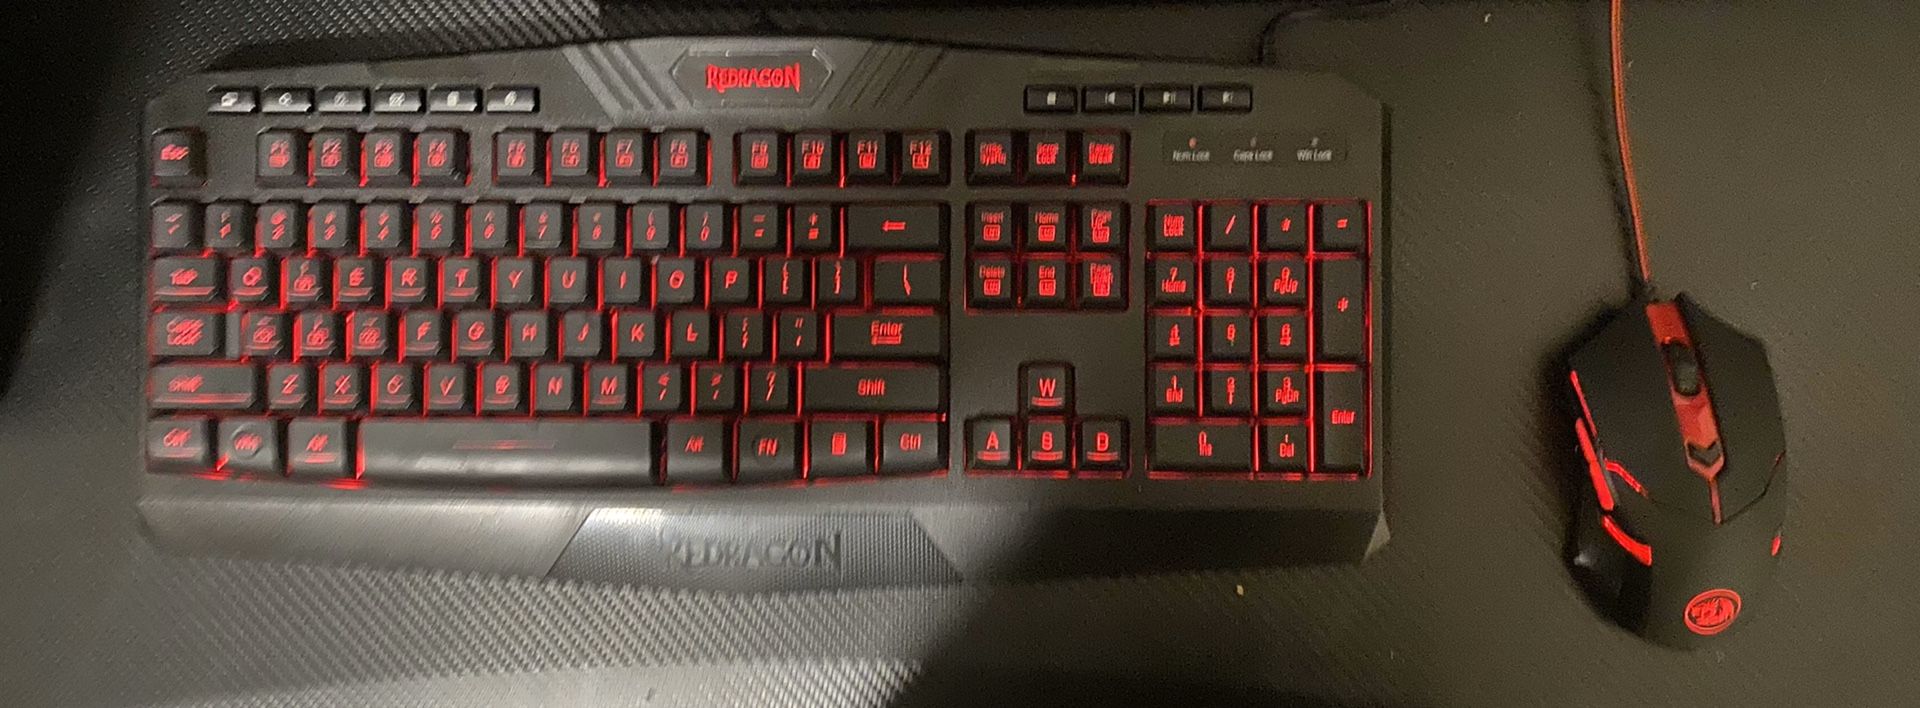 Red dragon membrain keyboard and mouse combo